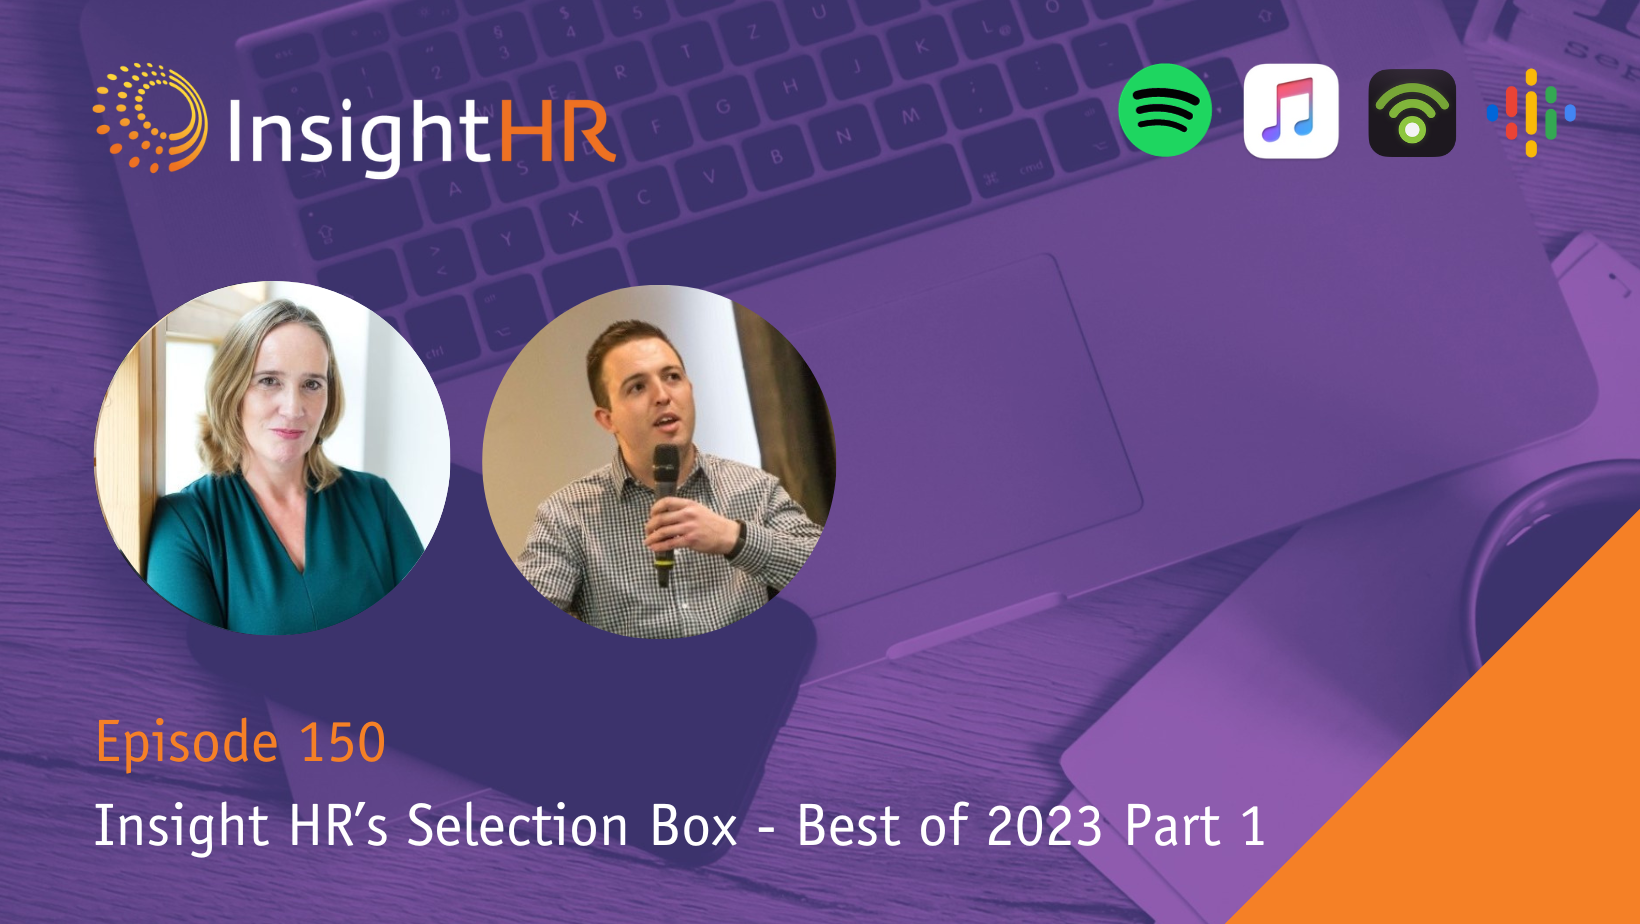 HR Room Podcast Episode 150 Best of 2023 Peter Cheese (CEO at CIPD), Sarah Benson (CEO at Women's Aid), Sinead Proos (Head of Wellbeing at Laya Healthcare), Jeni Brown (Chief People Officer at Teamwork), Tracy Gunn (Co-Founder at Platform 55) and Paul Merriman (Paul Merriman, CEO of Fairstone & Founder of AskPaul)